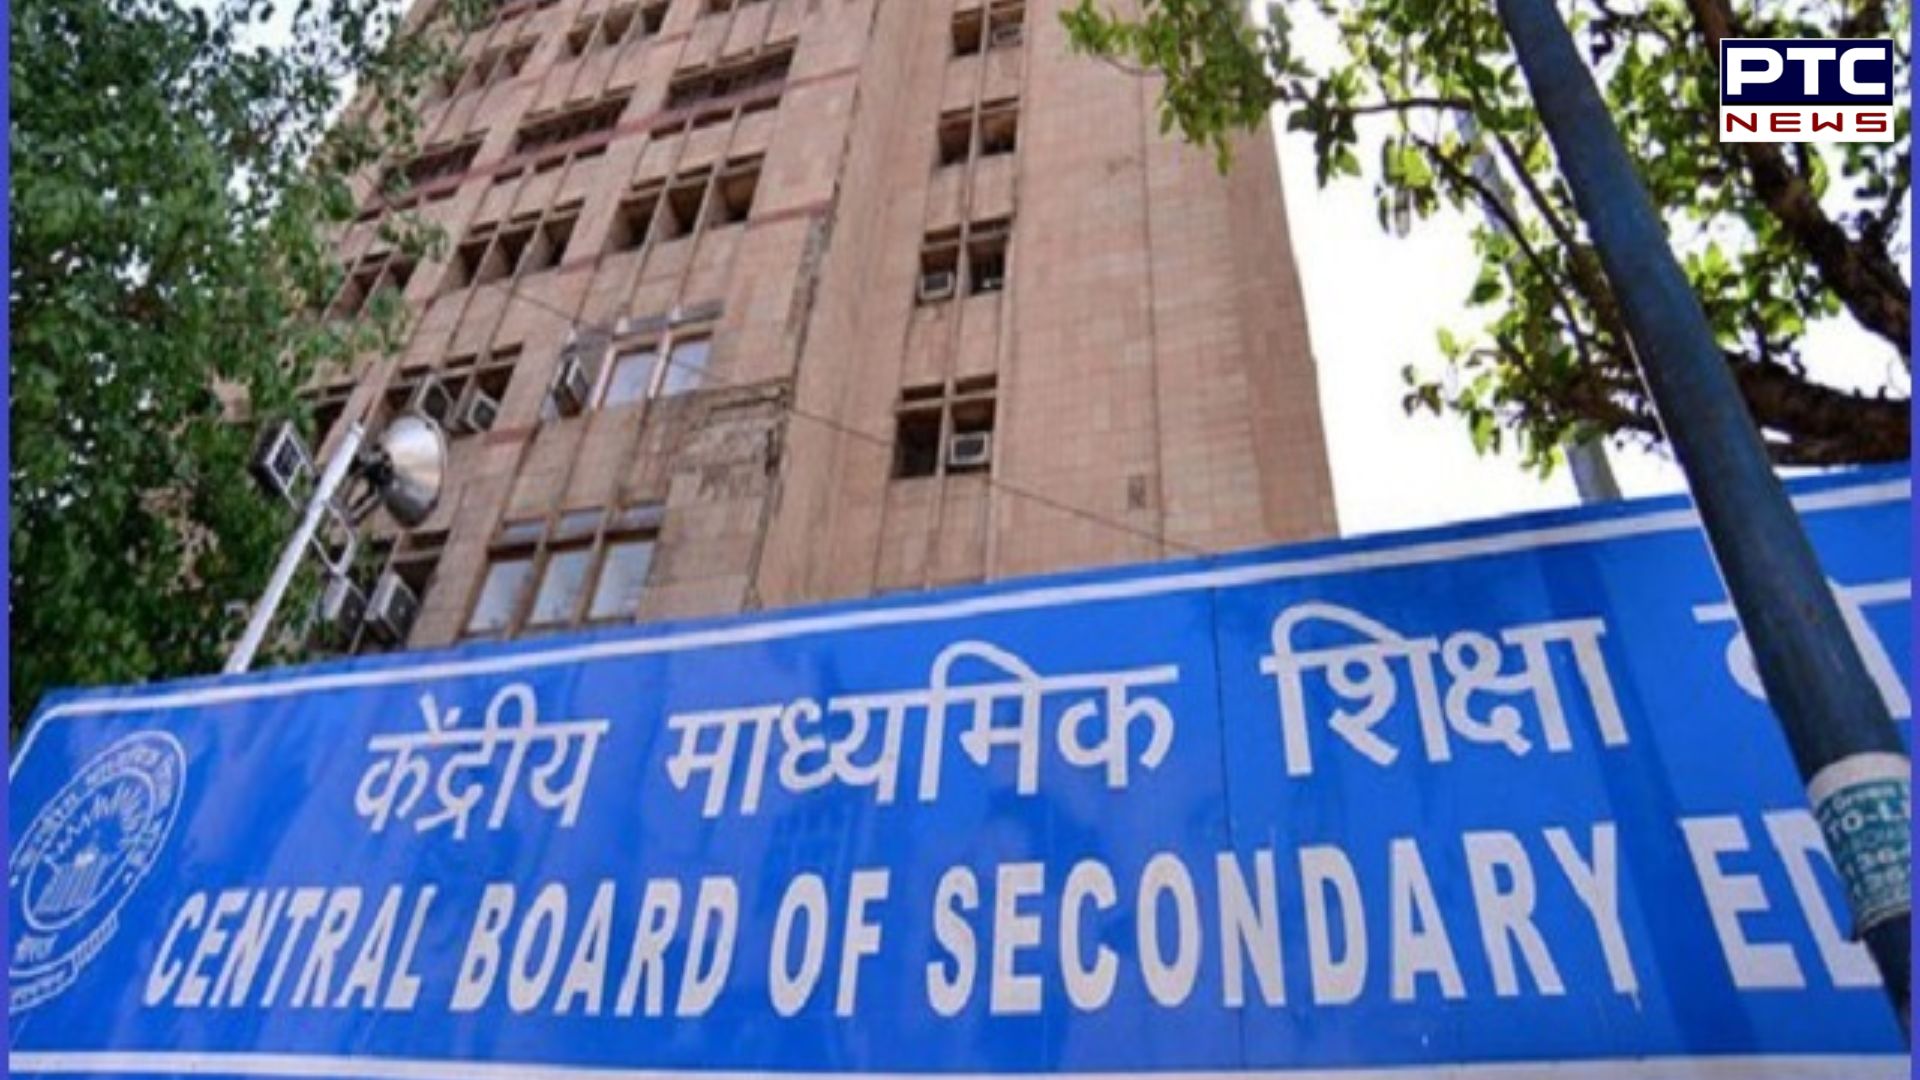 5 Delhi schools among 20 disaffiliated by CBSE over malpractices